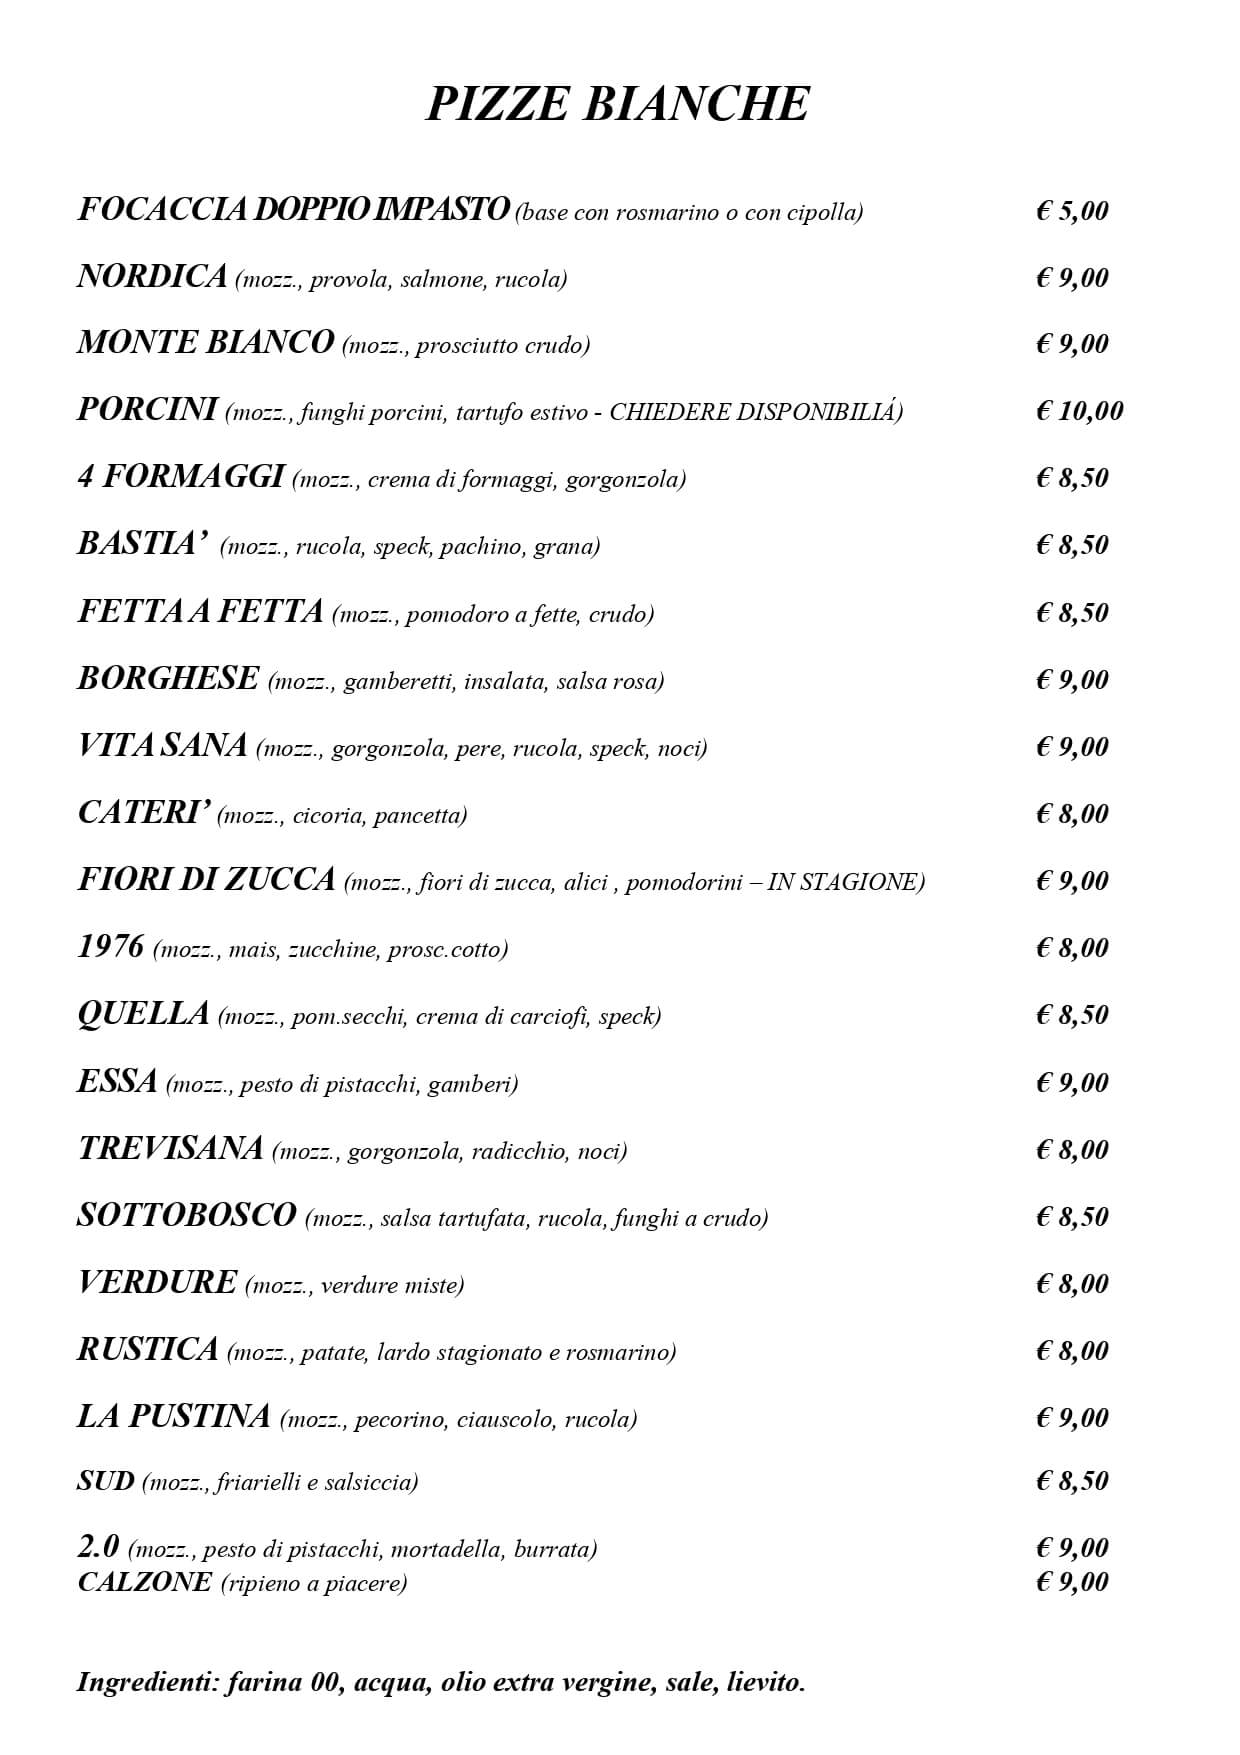 MENU pizze bianche nonna paperaAGG.2022_page-0005